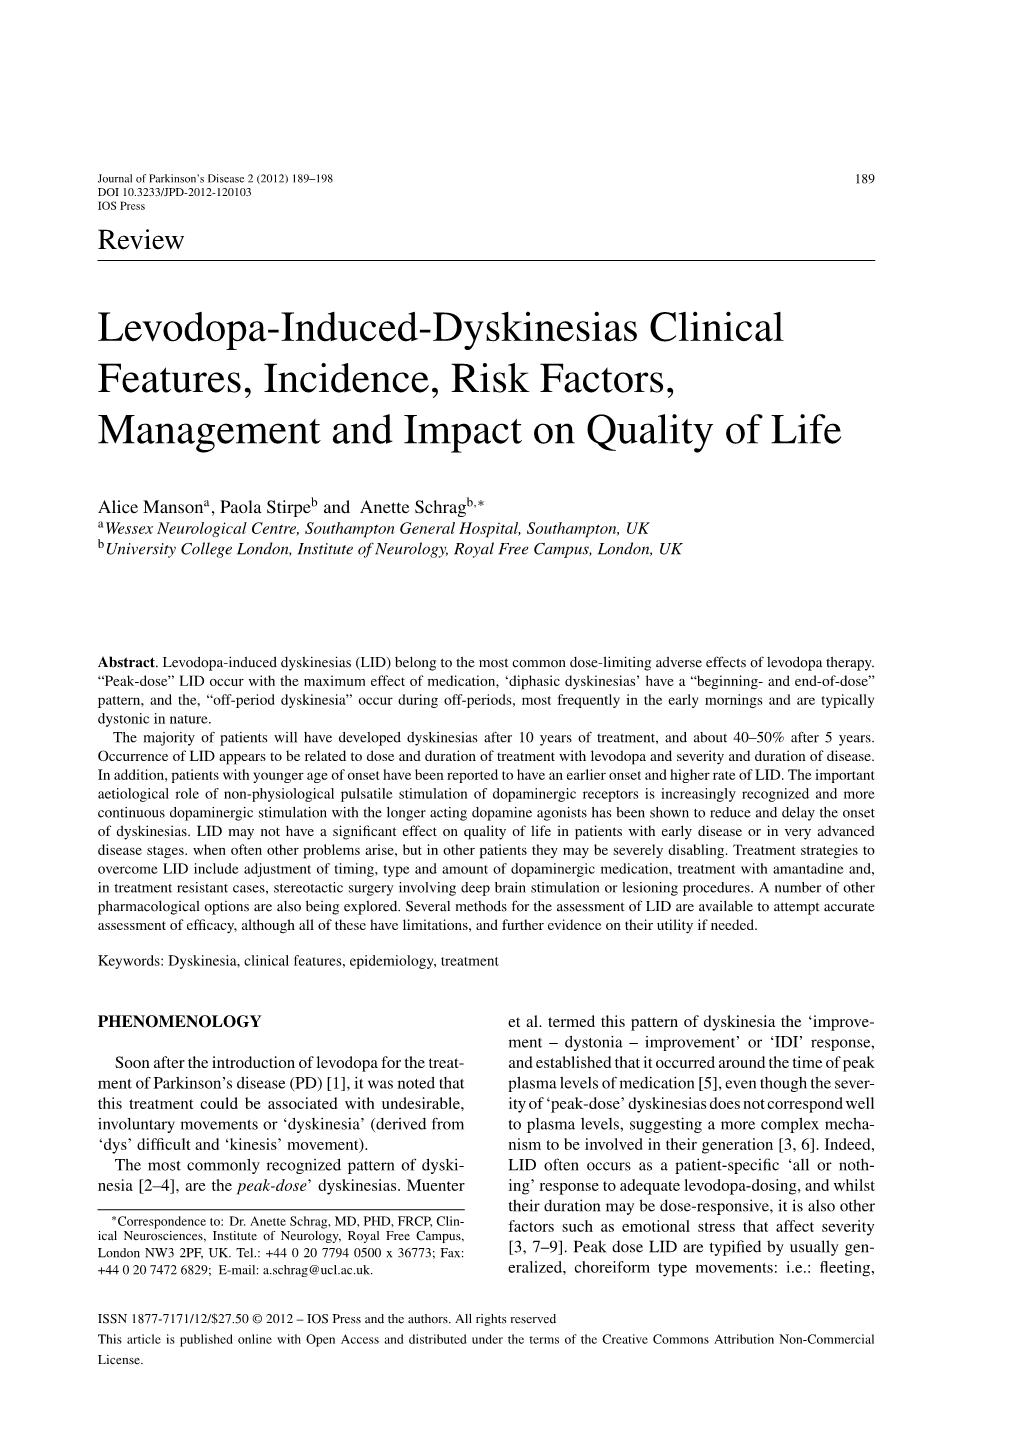 Levodopa-Induced-Dyskinesias Clinical Features, Incidence, Risk Factors, Management and Impact on Quality of Life